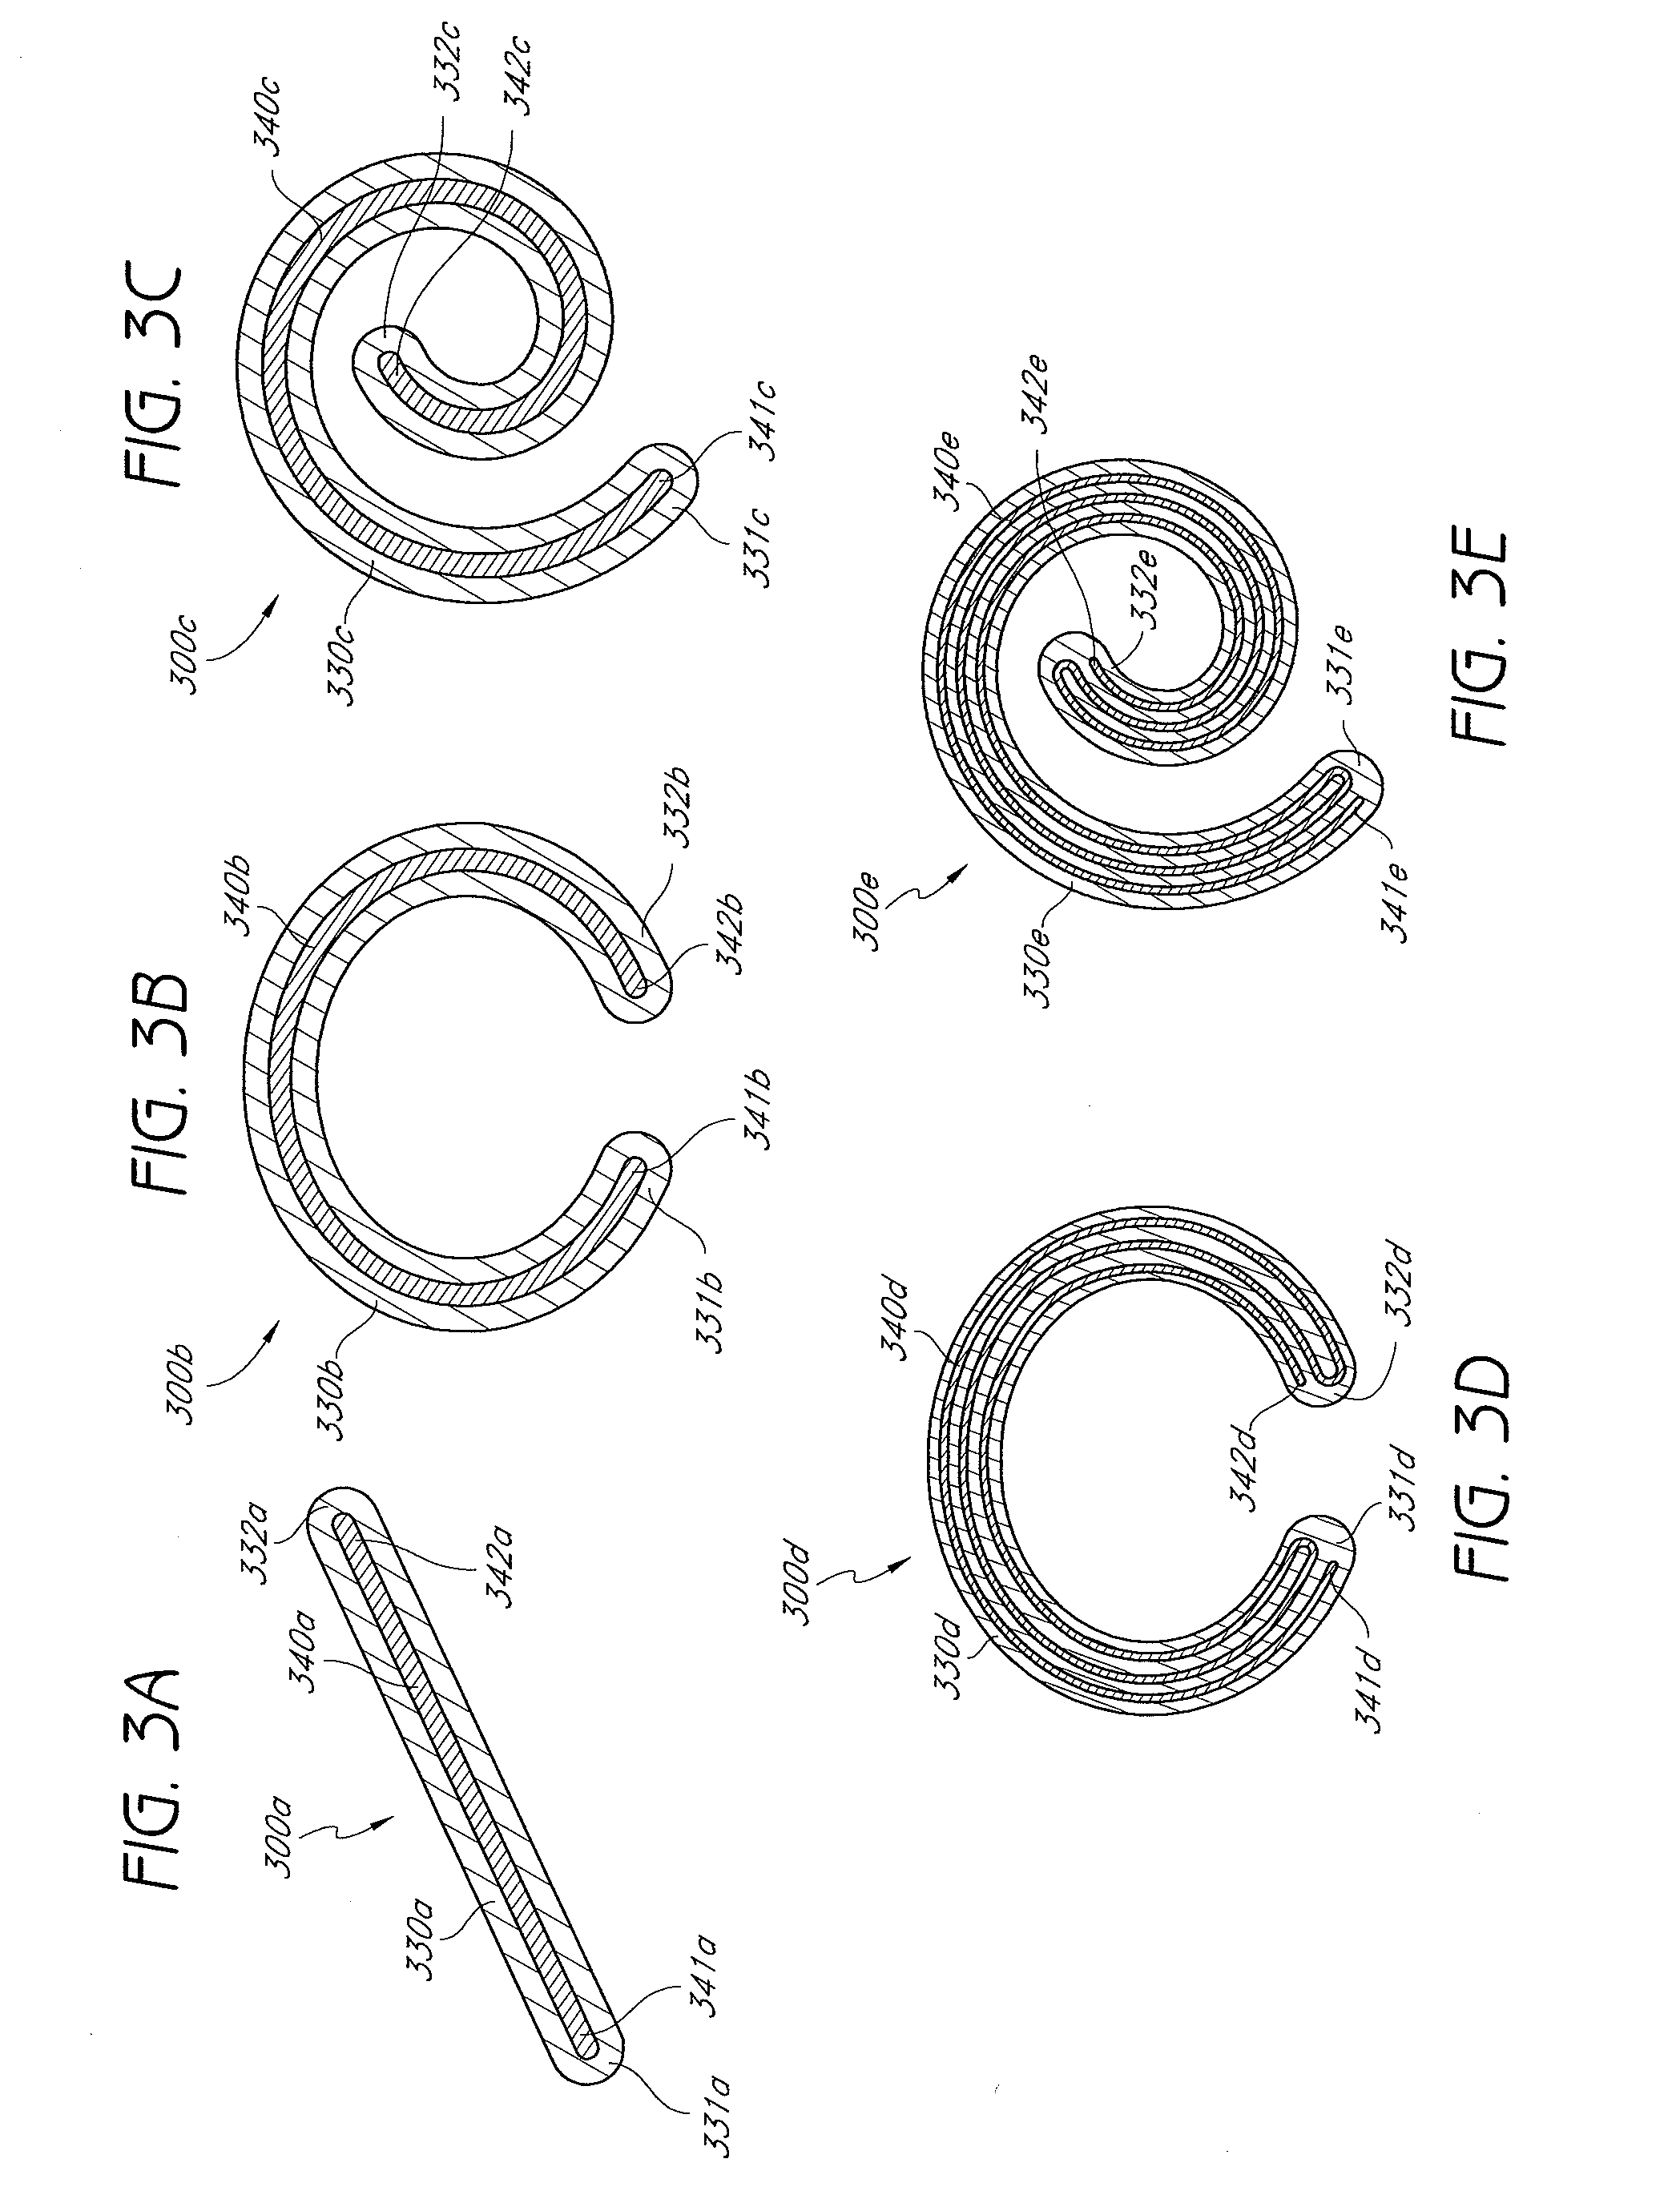 Percutaneously deliverable orthopedic joint device